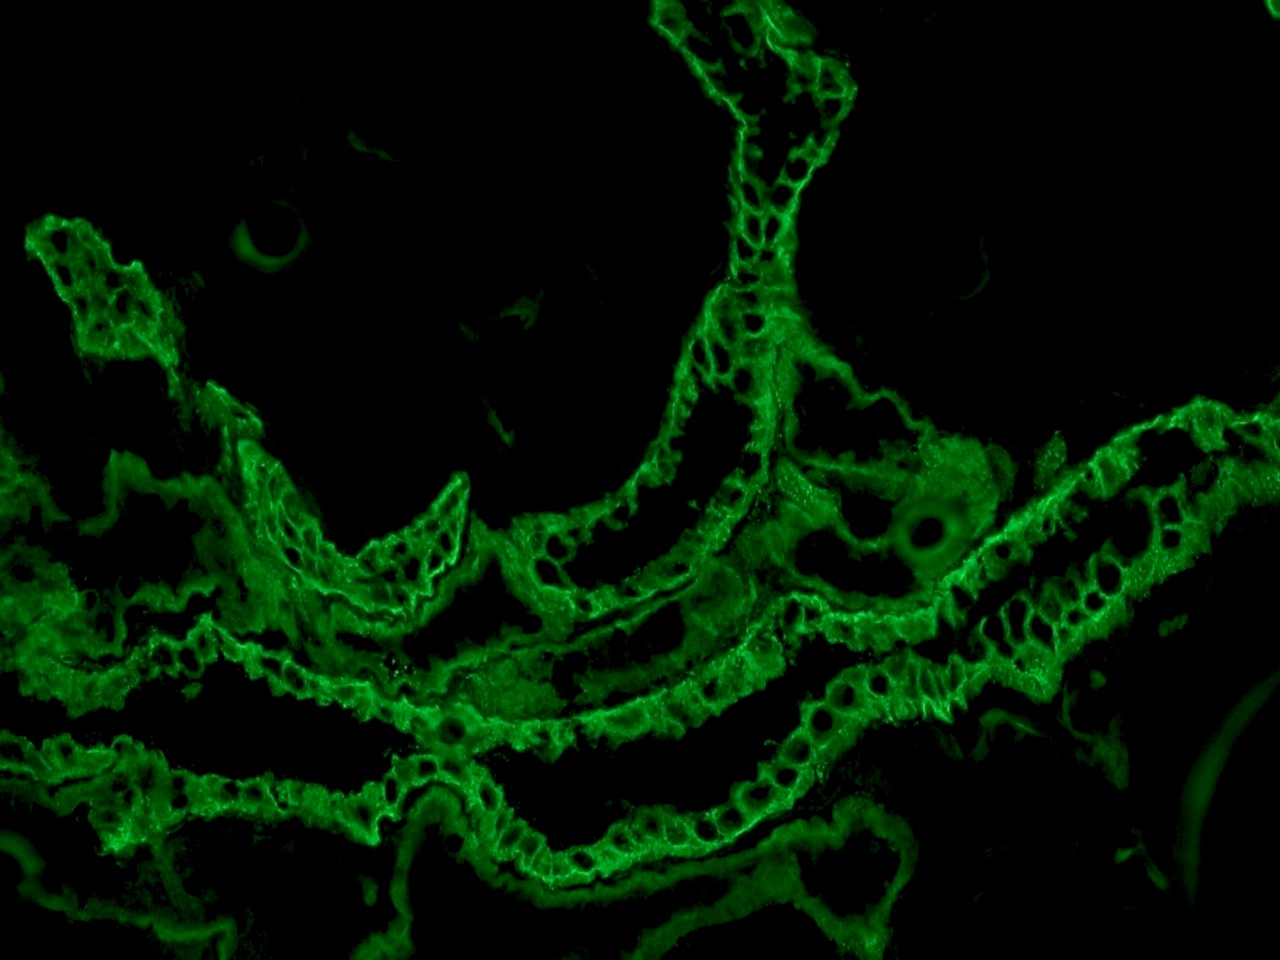 Figure 1. Indirect immunofluorescence staining of EpCam in human kidney epithelial cells using MUB2061P, clone HEA125 at a 1:500 dilution.